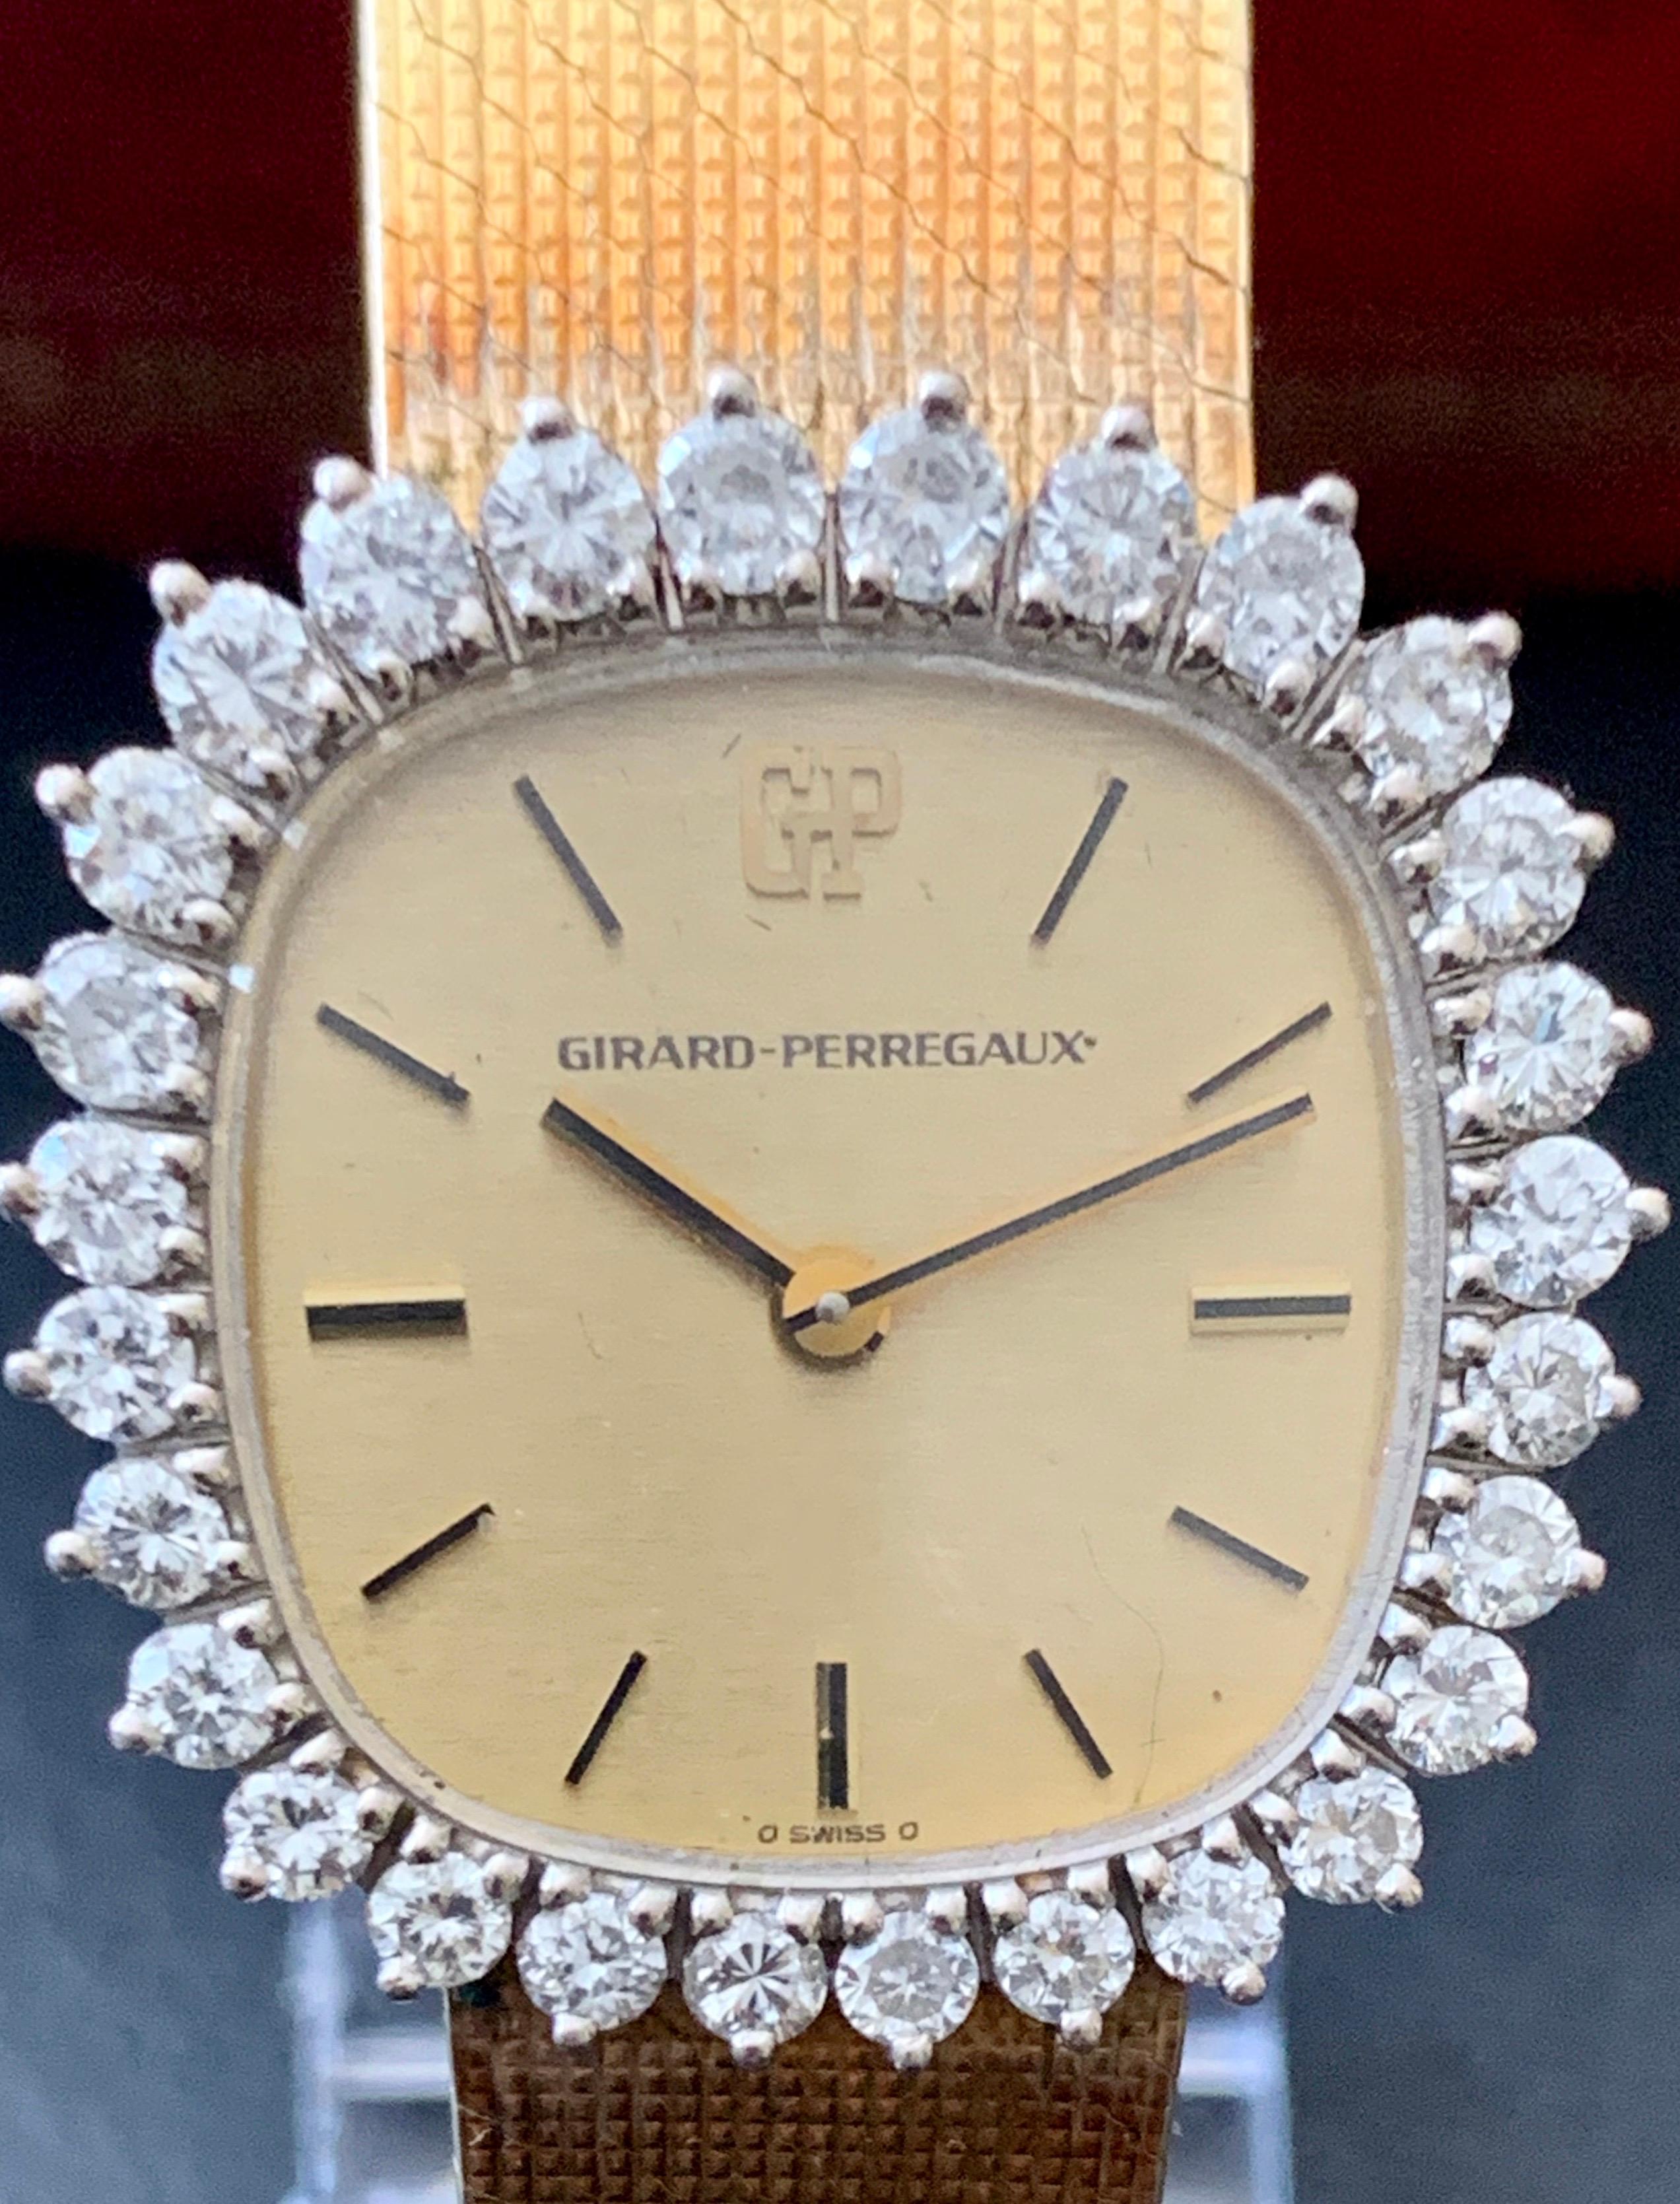 This gorgeous vintage watch is in excellent condition and is in great working order. It is swiss made with pointed type hands. It features a gold dial with applied gold baton hour markers and has a 17 jewel swiss movement (number (504 - 802). The